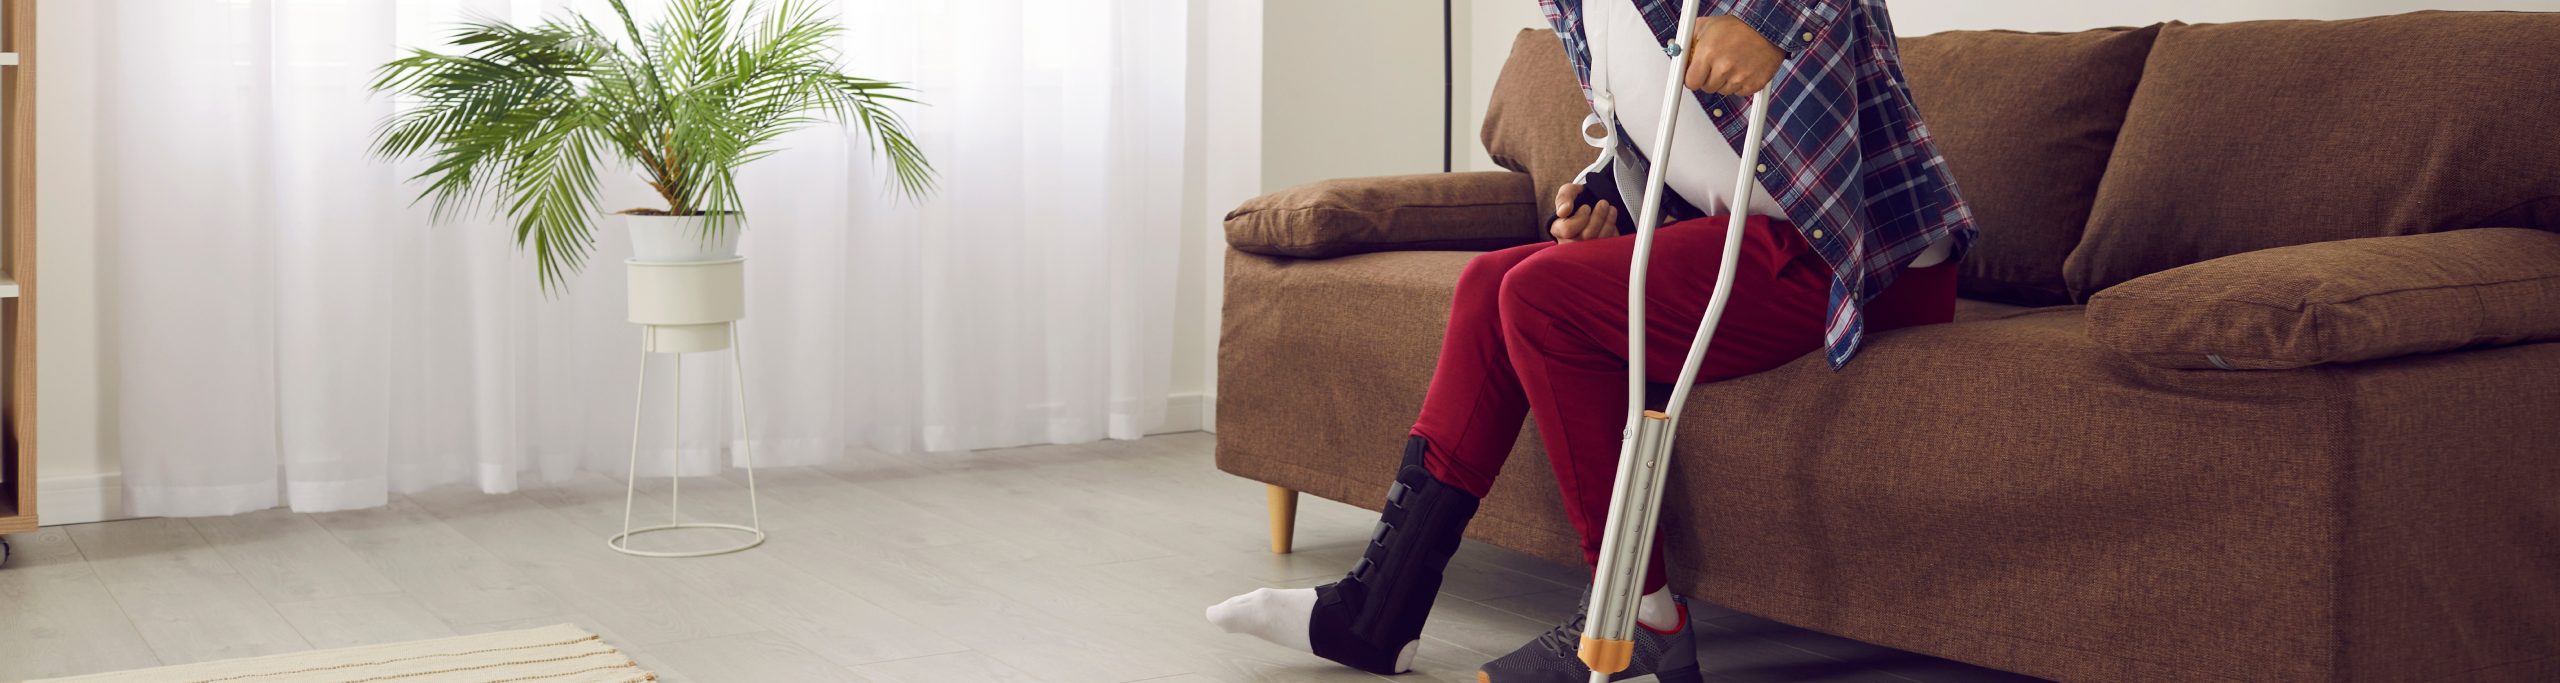 person sitting on a couch with a plaster cast on their leg and holding a crutch. Indicates they have had an accident.